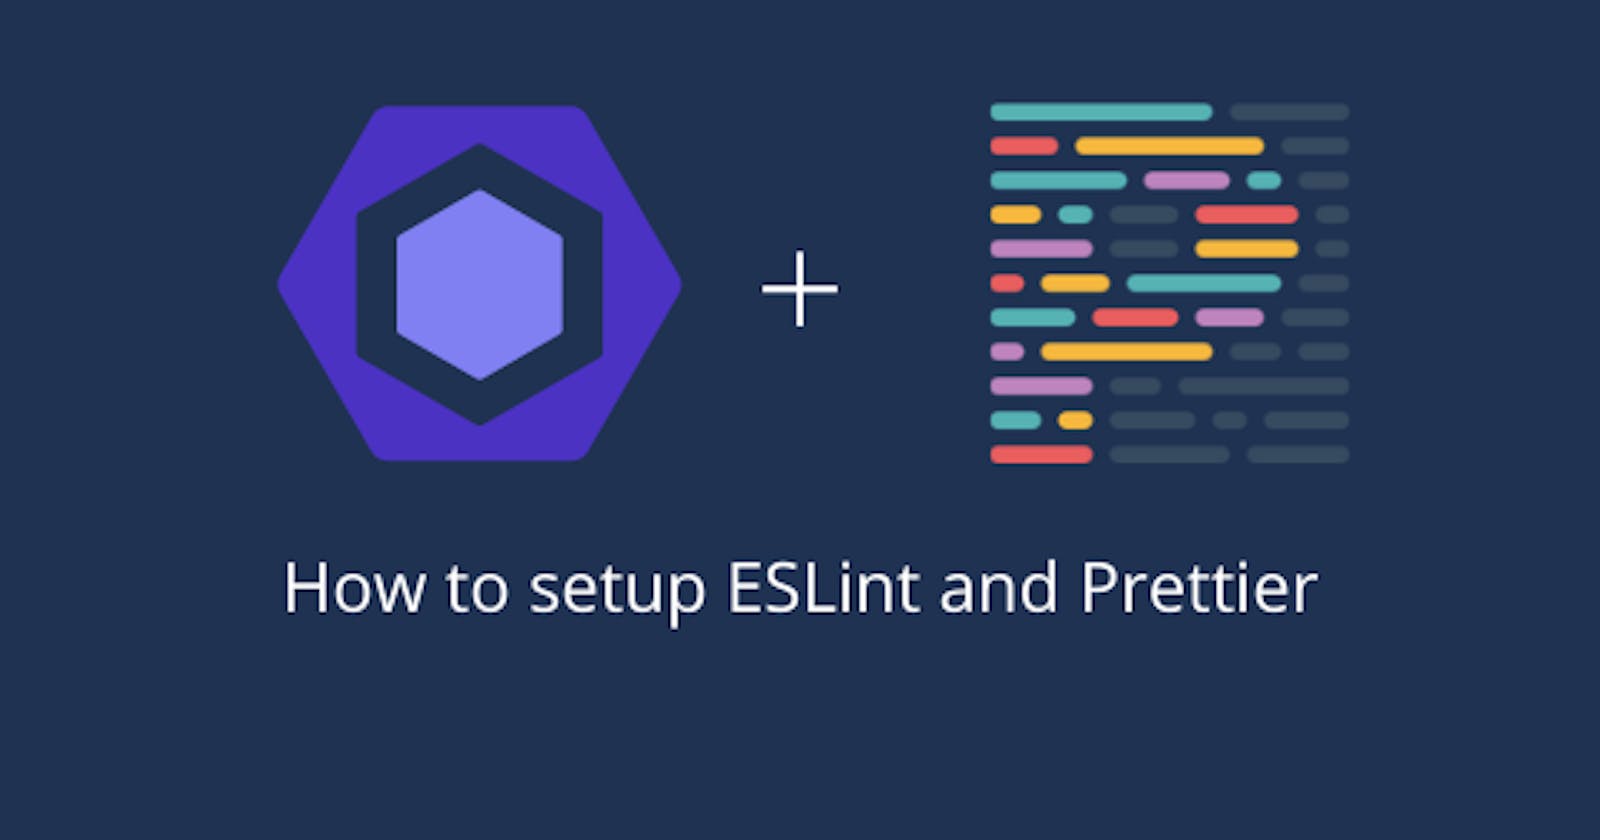 How to setup ESLint and Prettier for your JavaScript projects